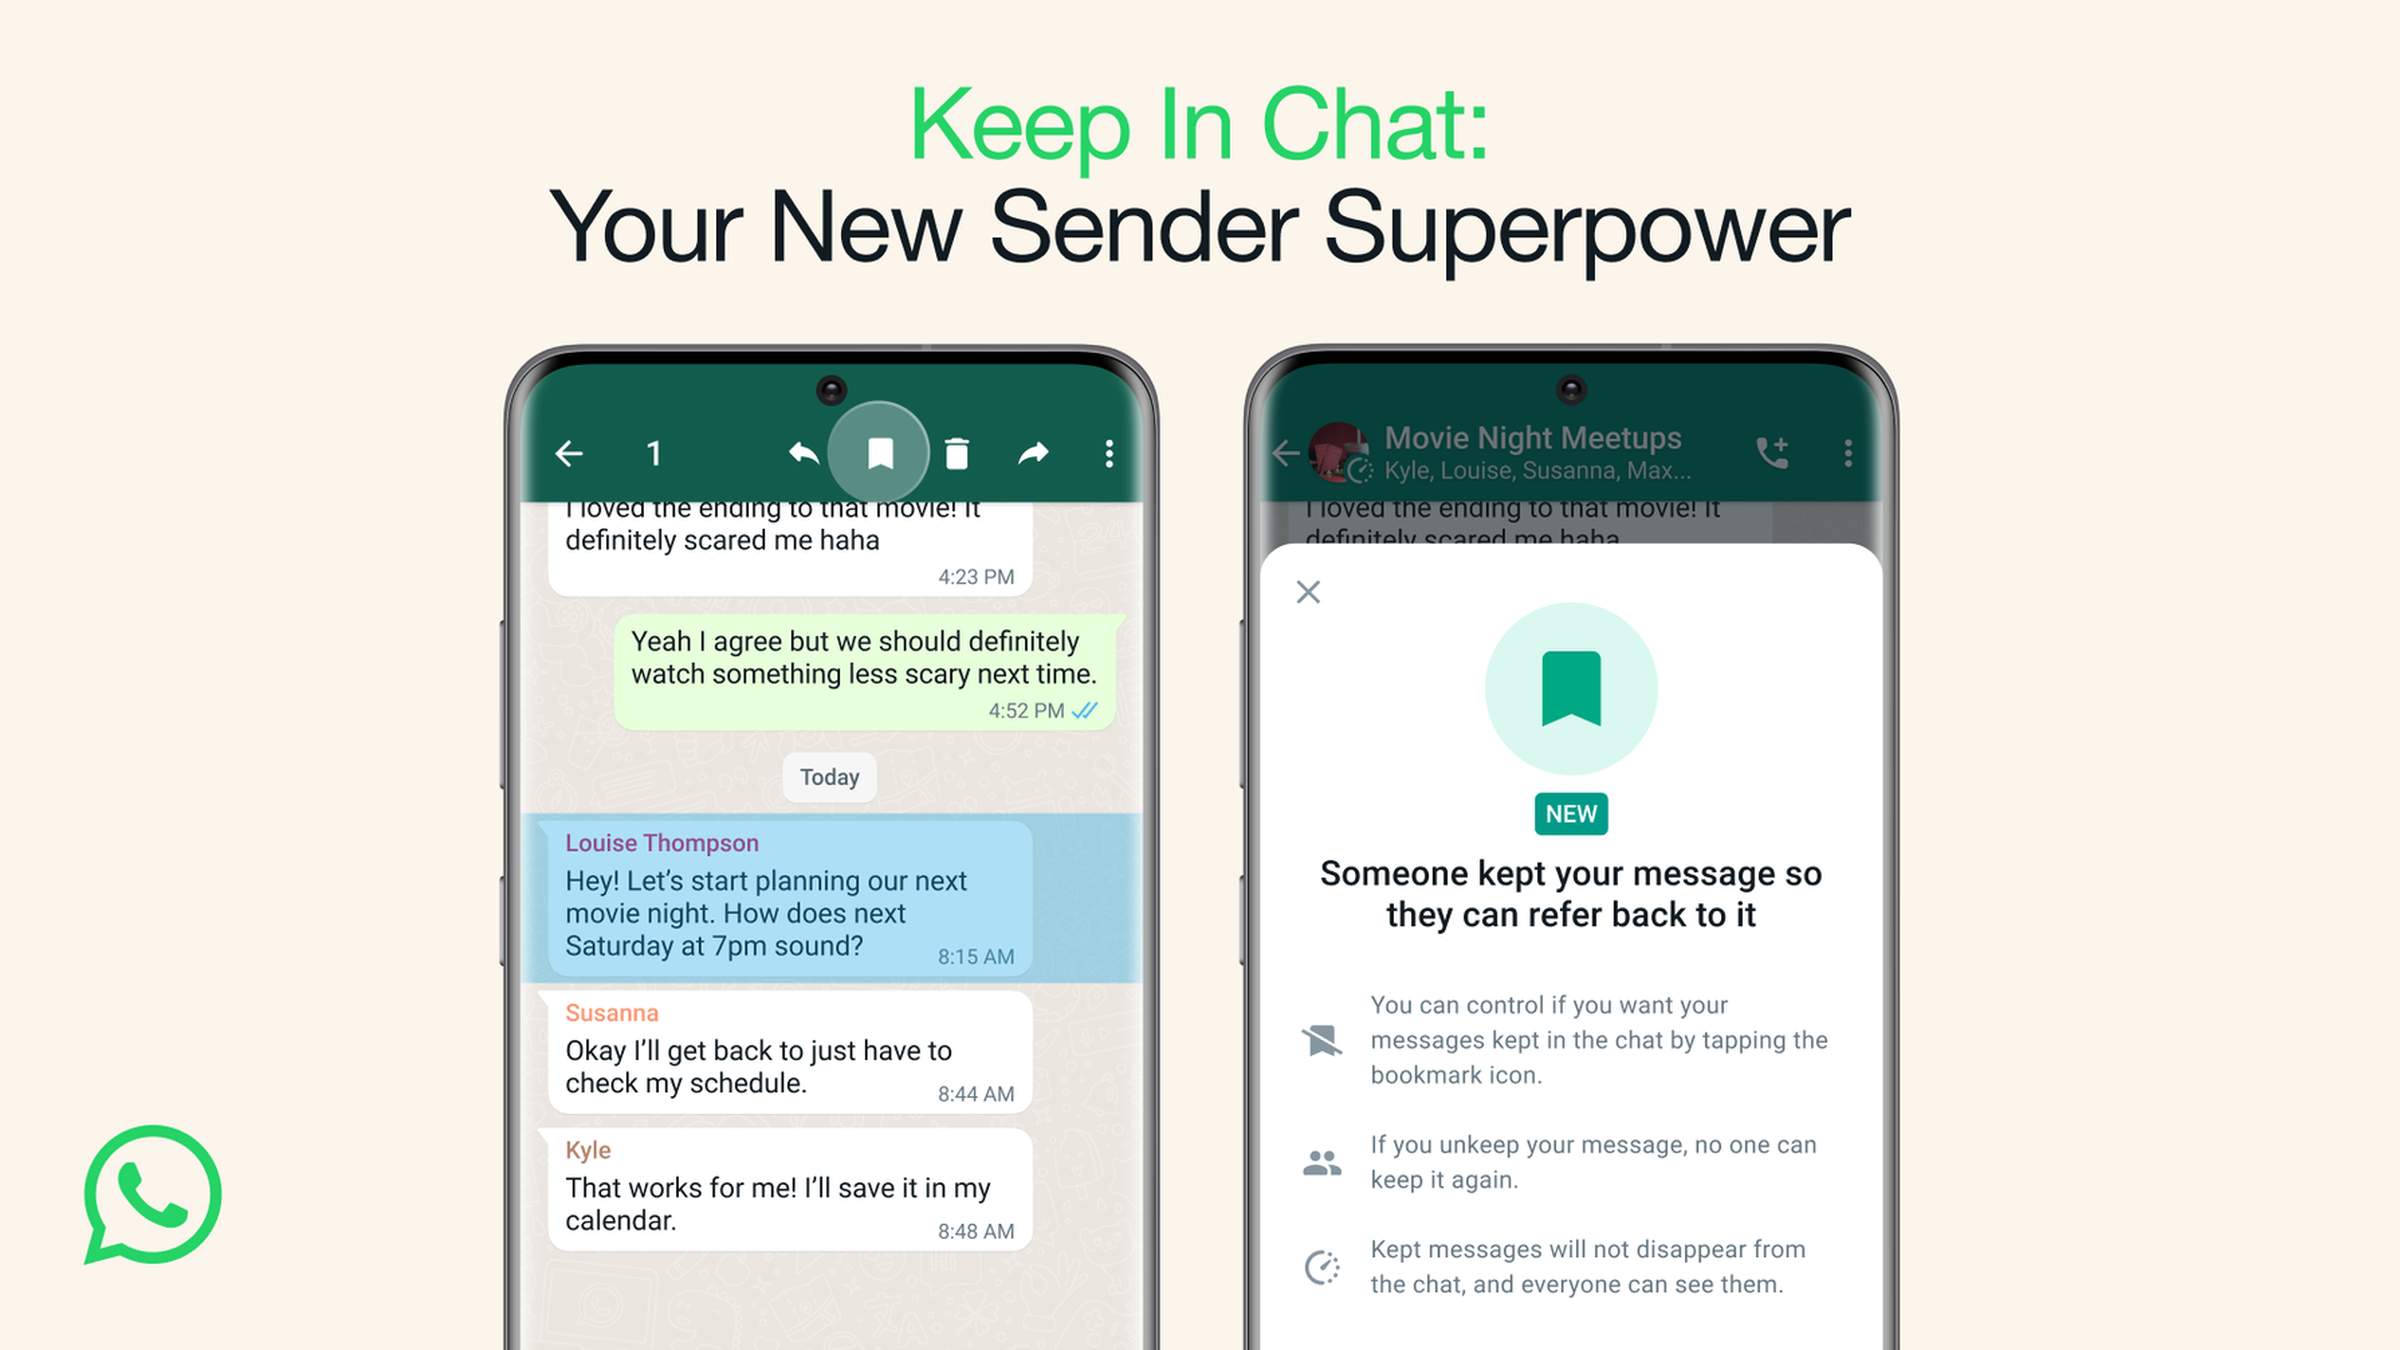 Illustration showing two simulated phone screens running WhatsApp, with one person choosing to keep a disappearing message, while on the other end the sender receives a notification that the messages was saved, allowing them to choose to allow the save or deny it.